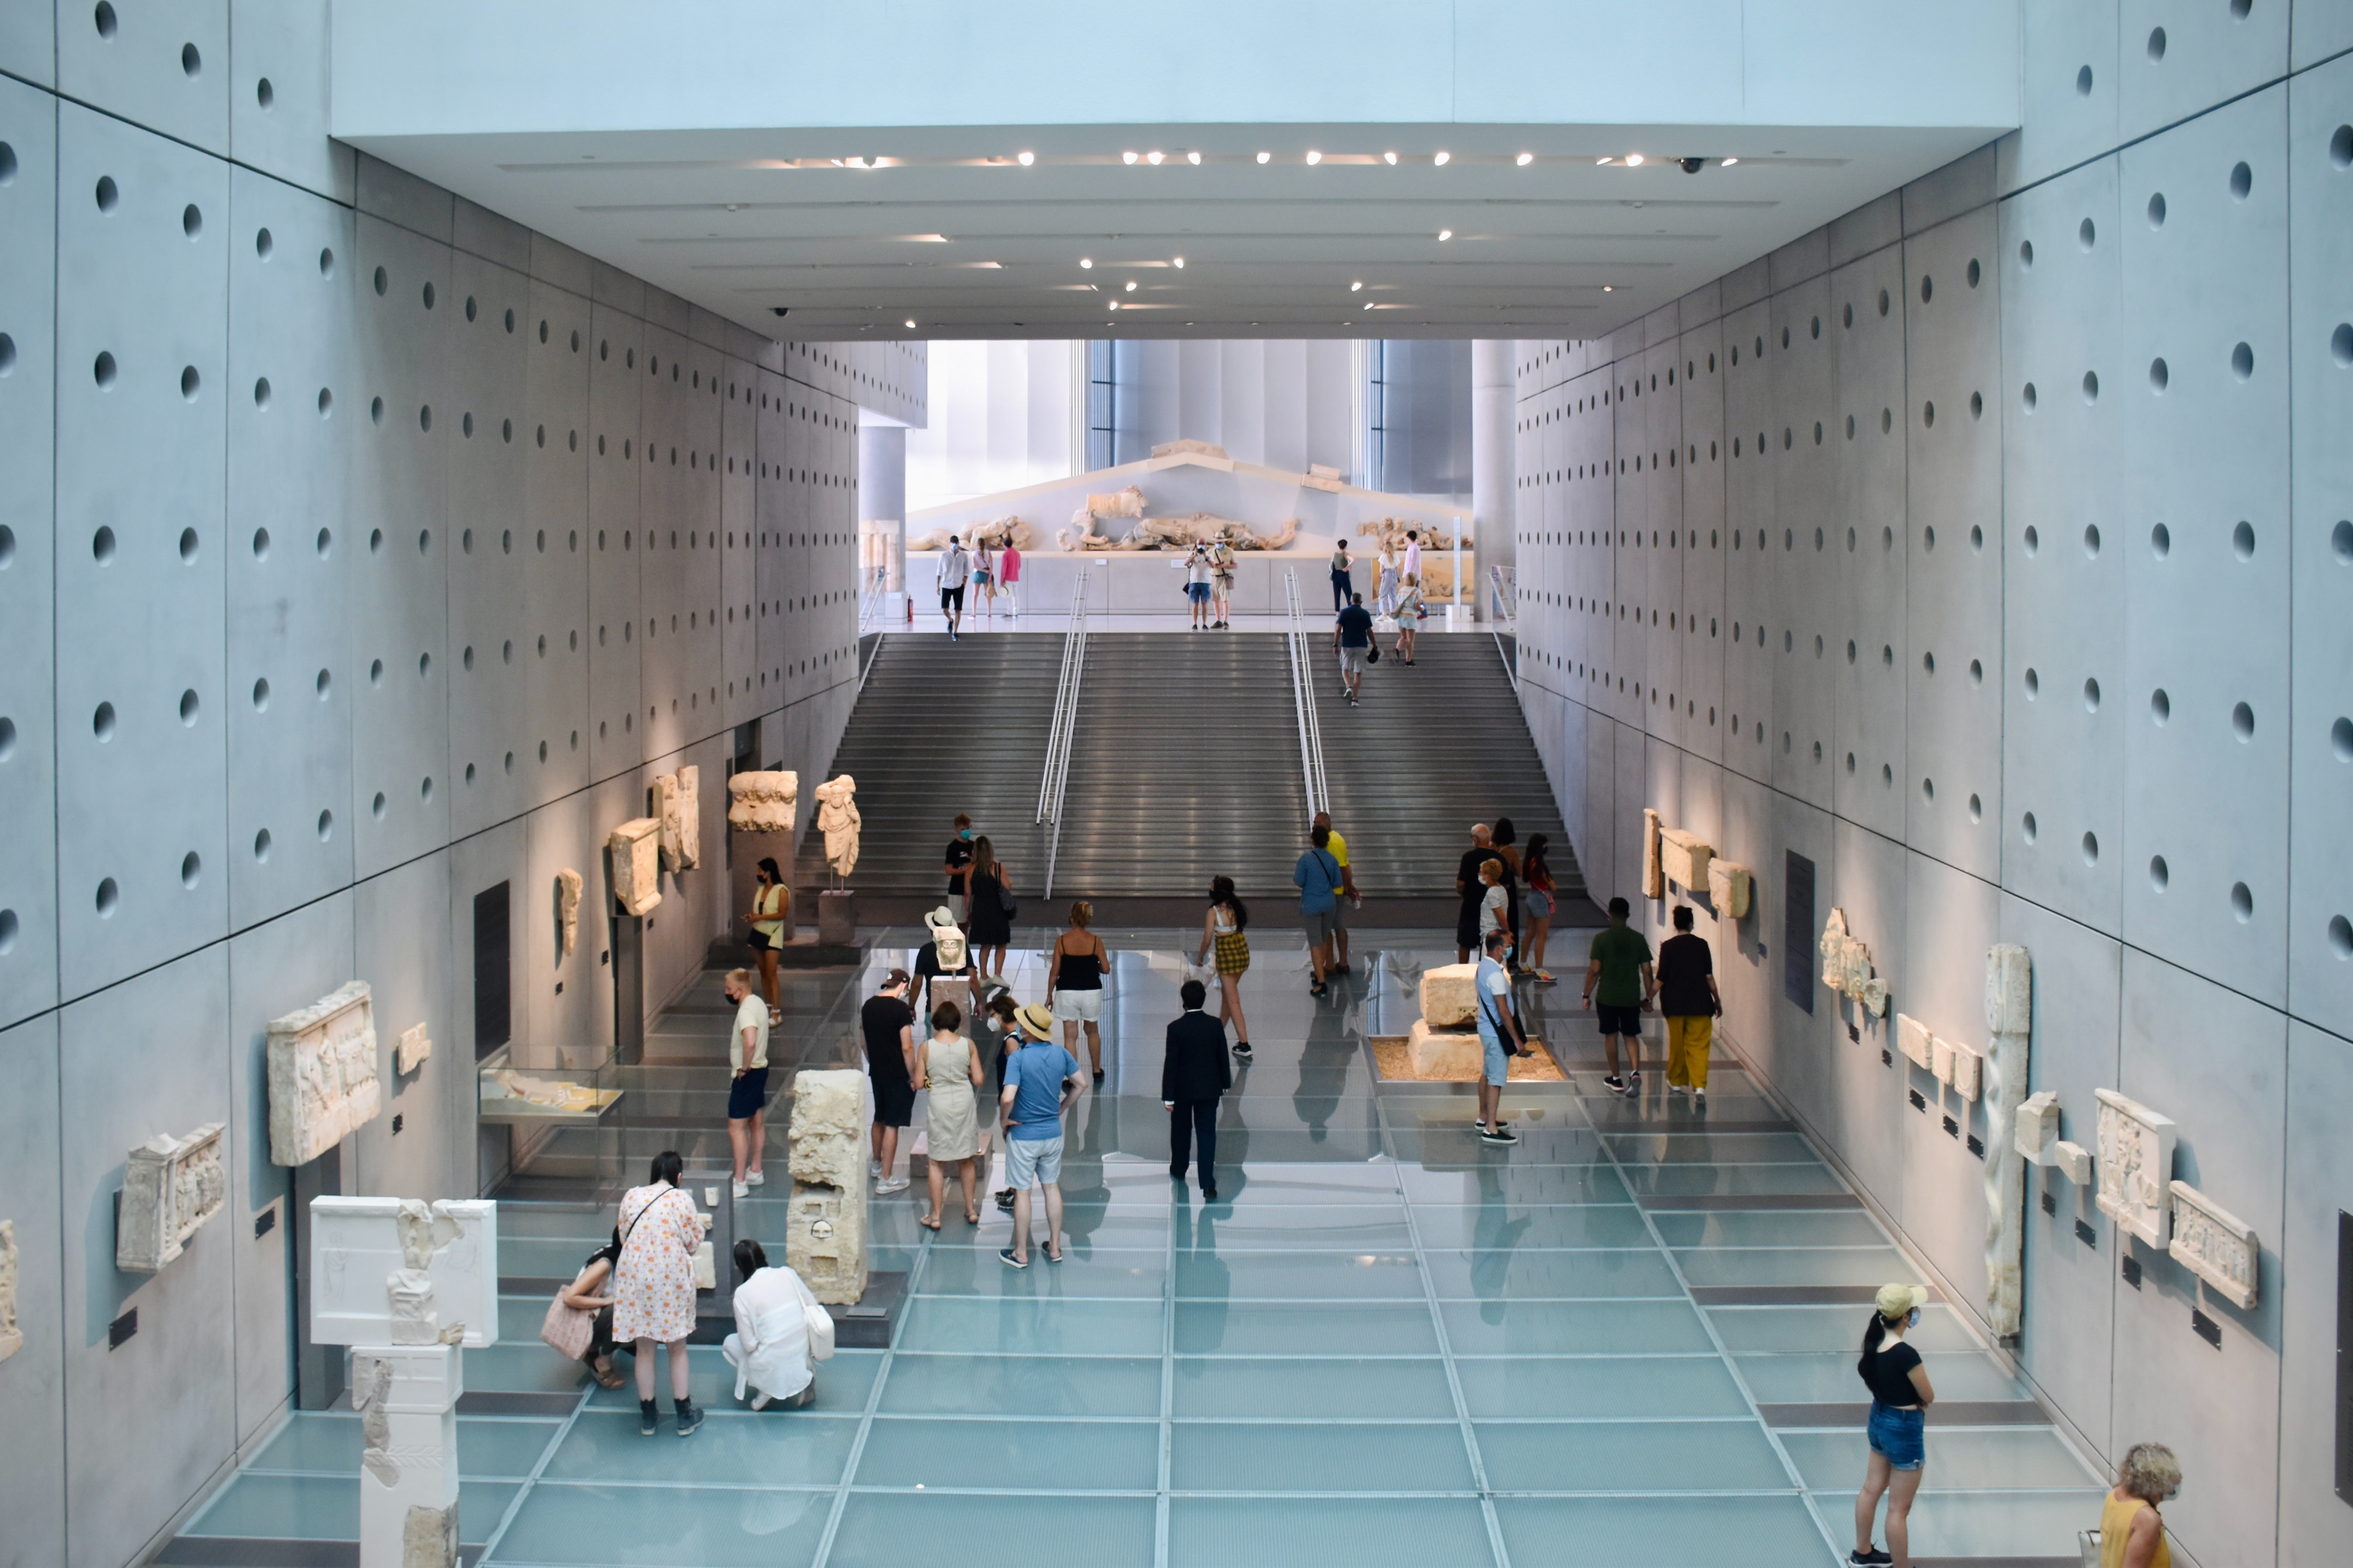 The interior of the Acropolis Museum